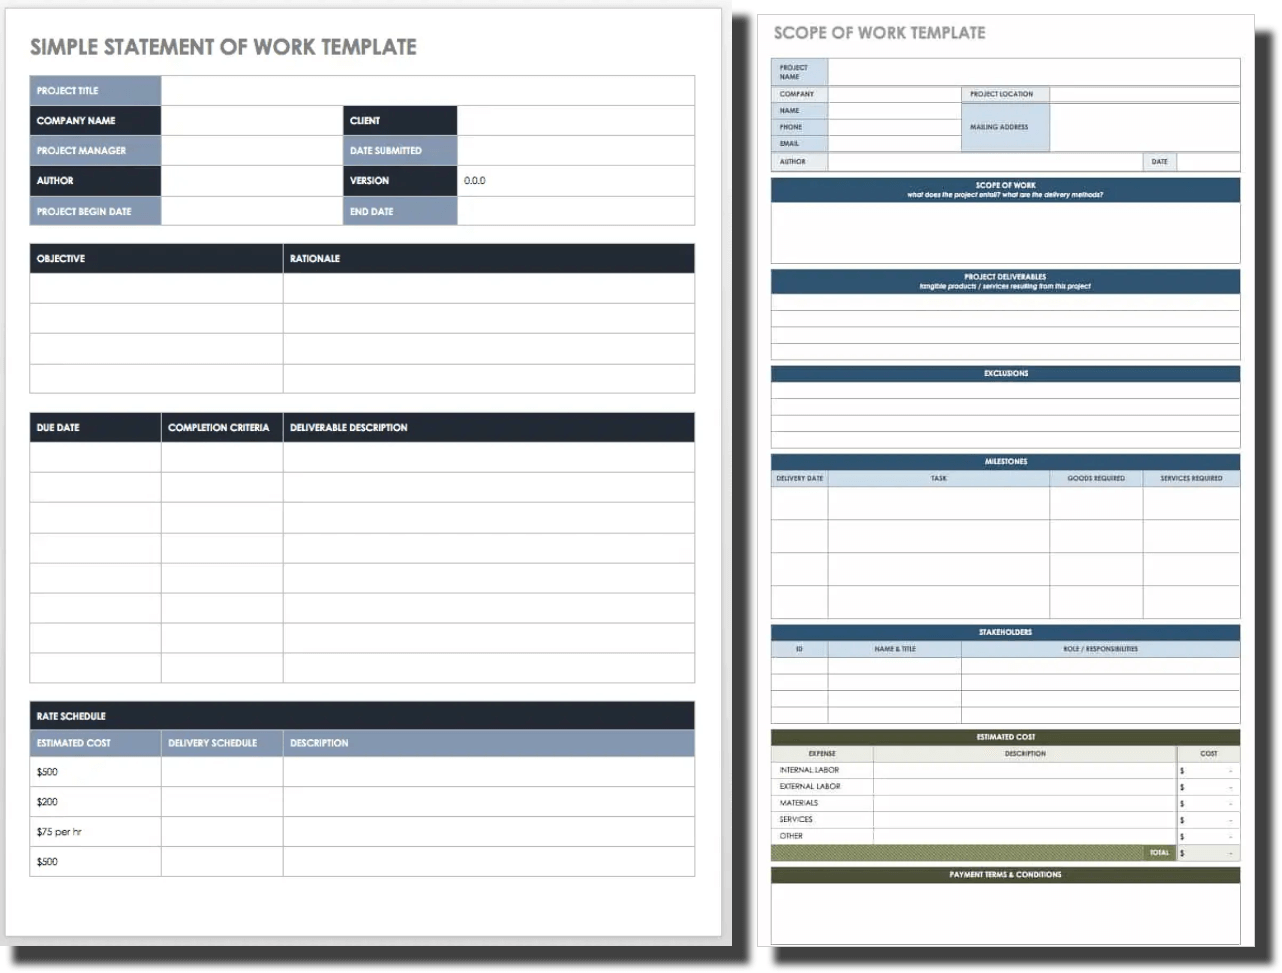 Statement of Work and Project Scope Templates